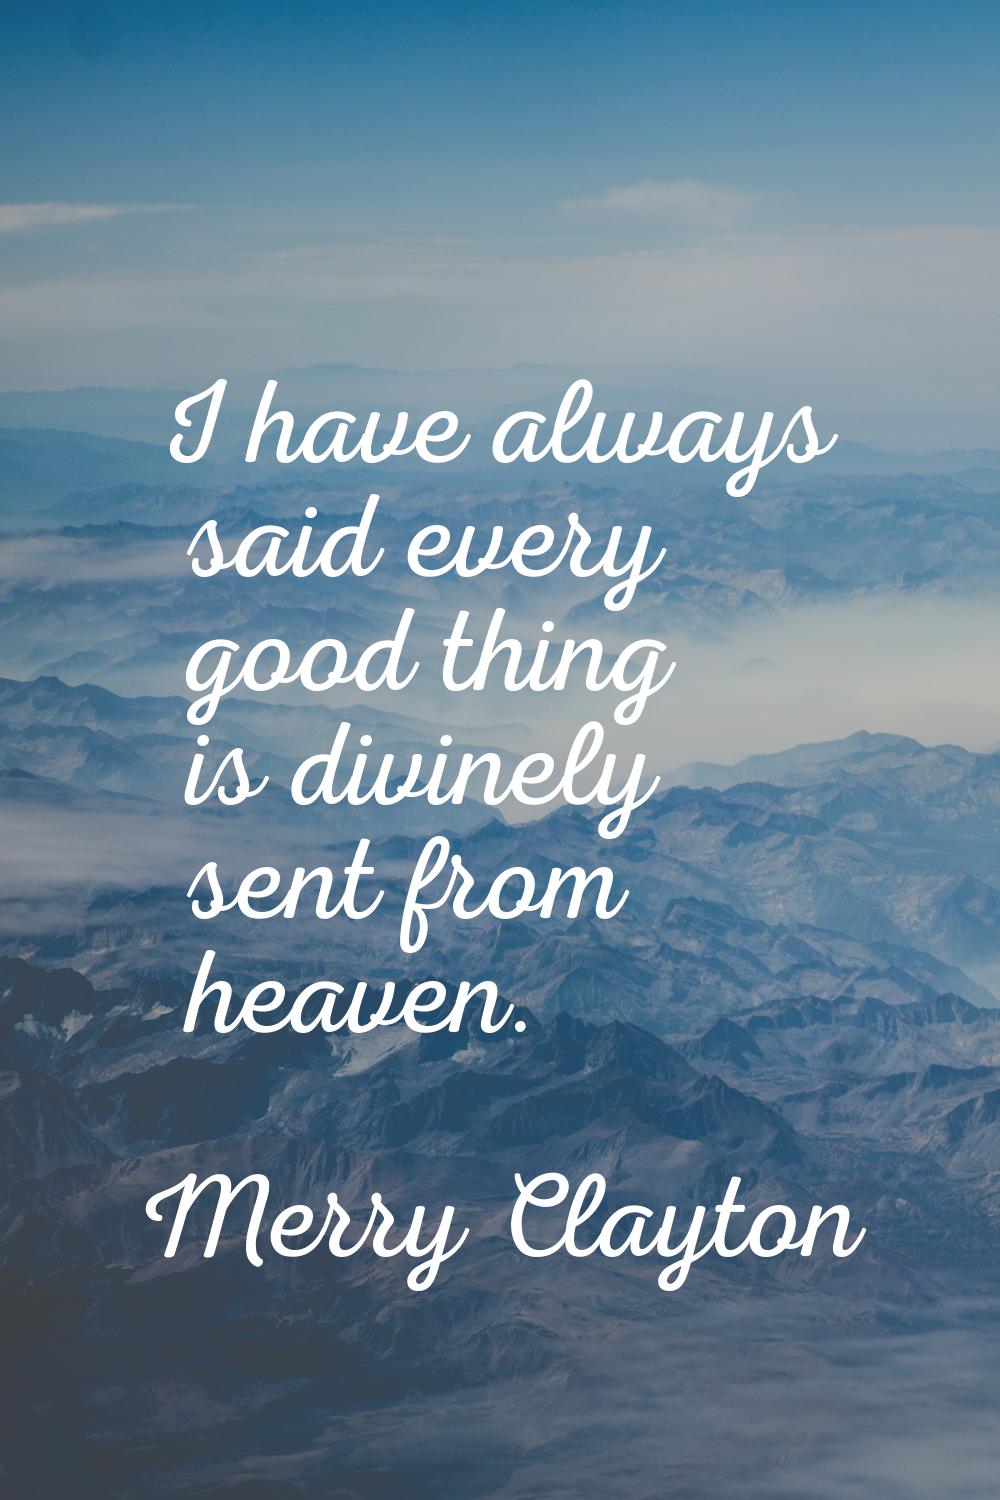 I have always said every good thing is divinely sent from heaven.